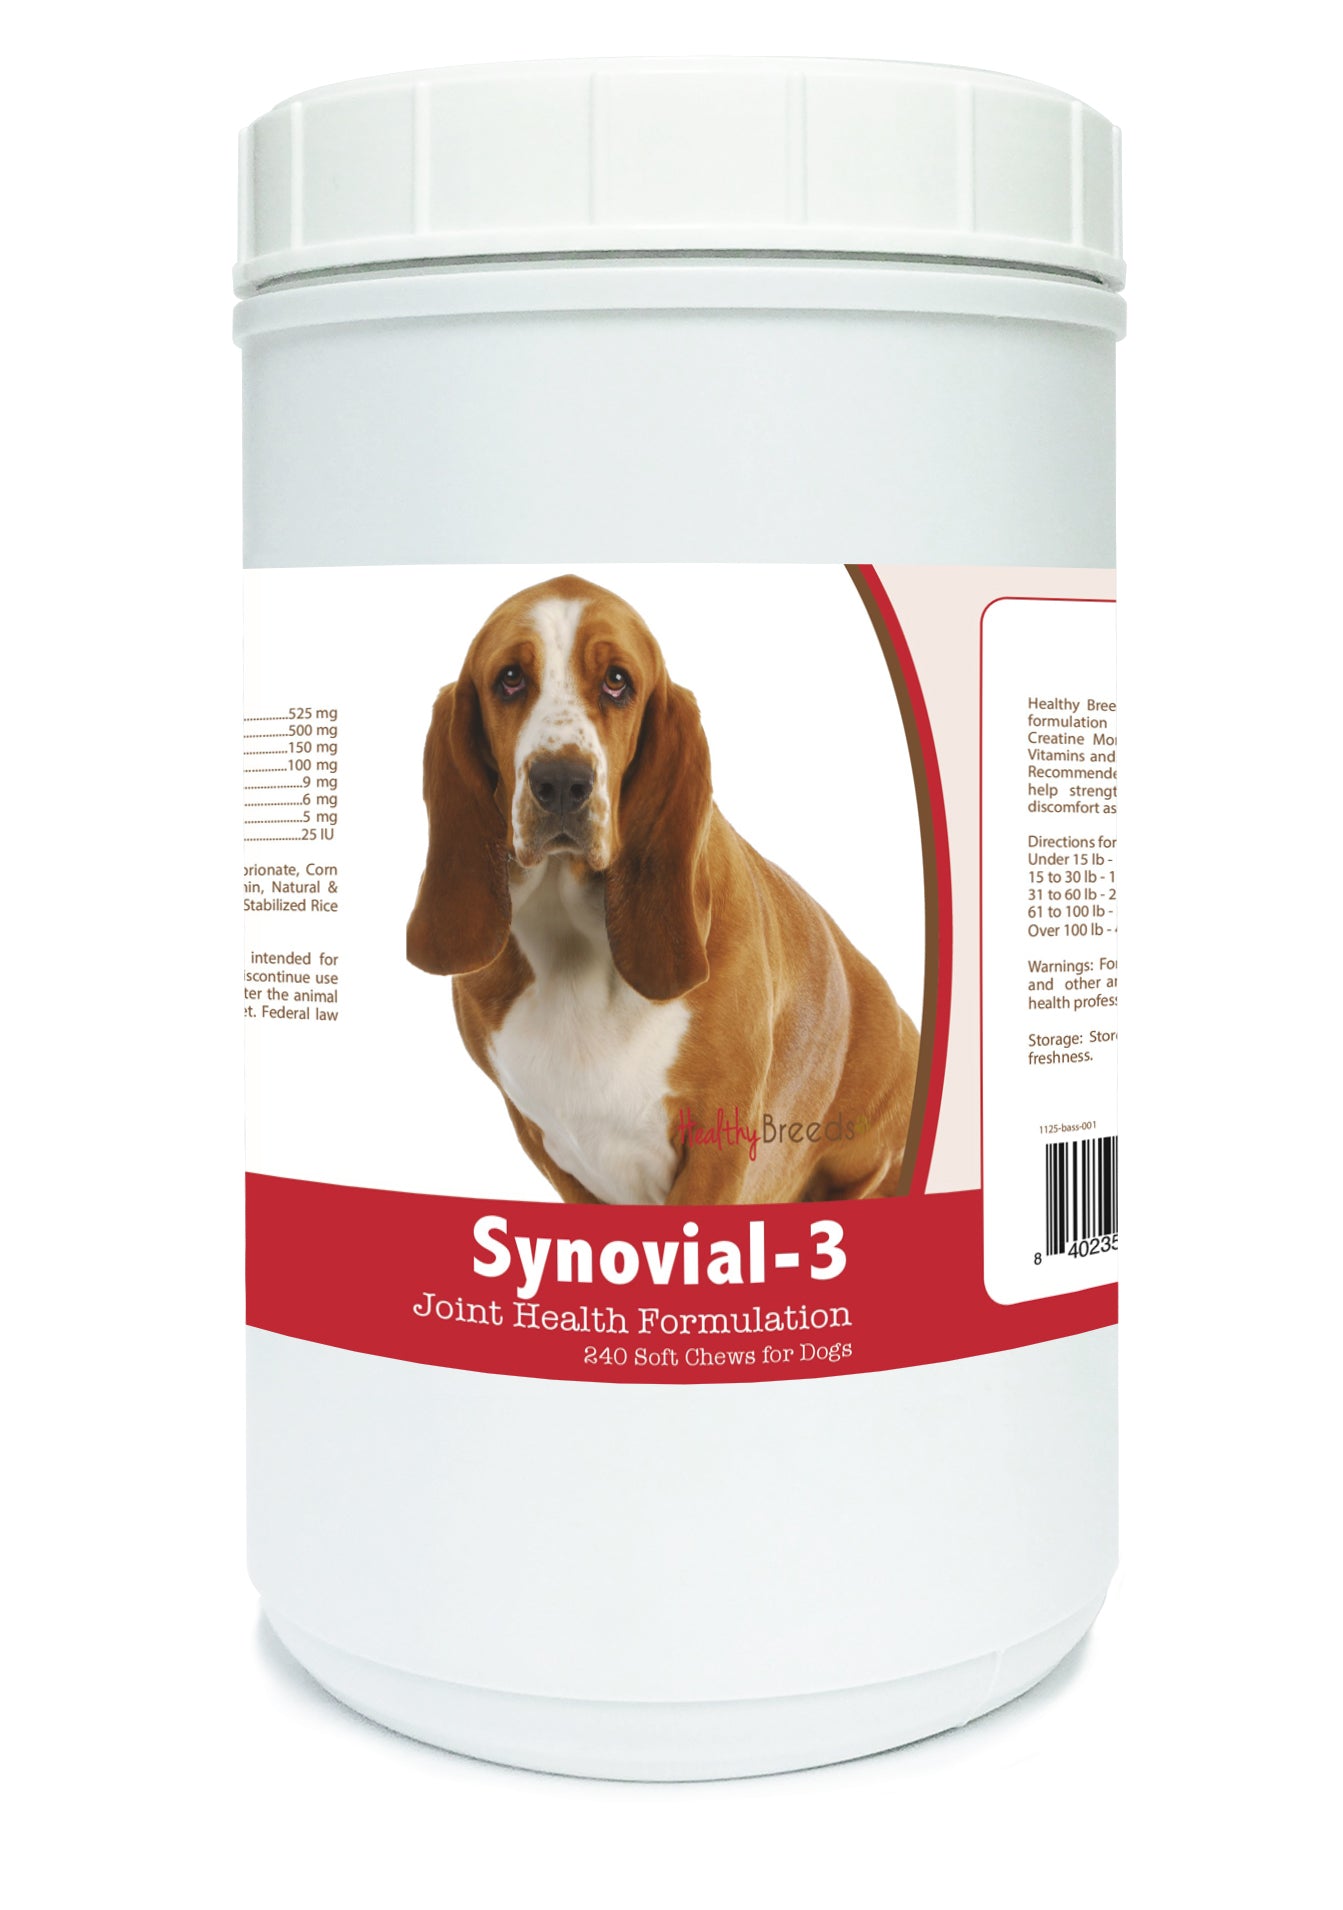 Basset Hound Synovial-3 Joint Health Formulation Soft Chews 240 Count